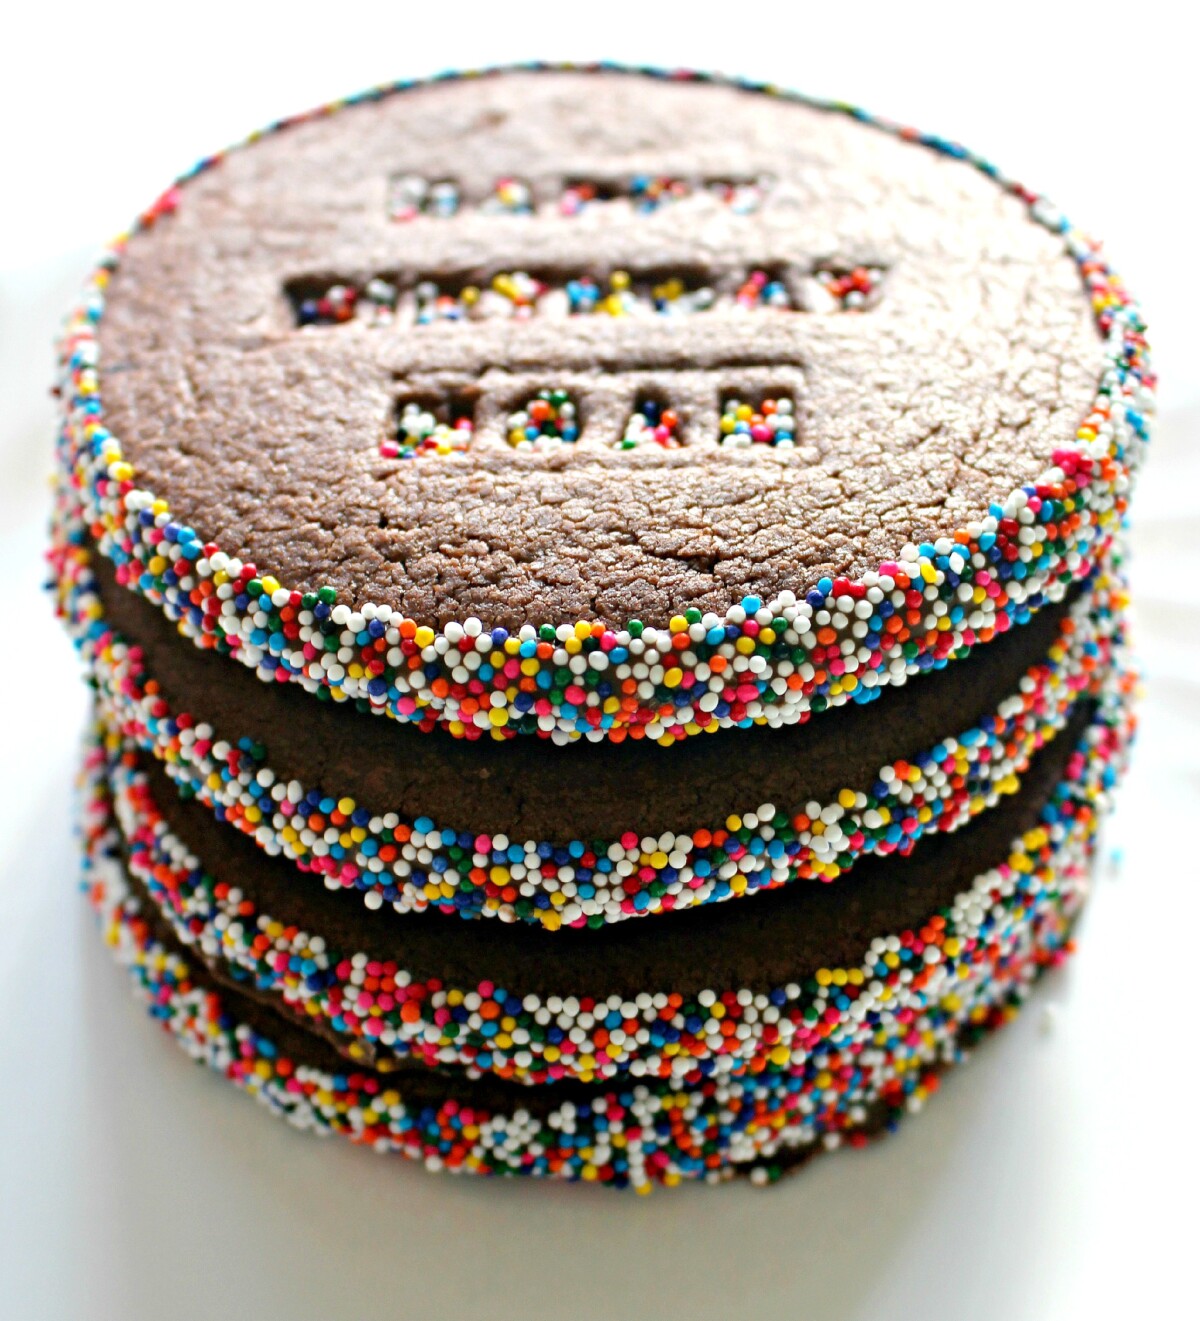 Stack of chocolate cookies with multicolored nonpareil sprinkles on their edges.